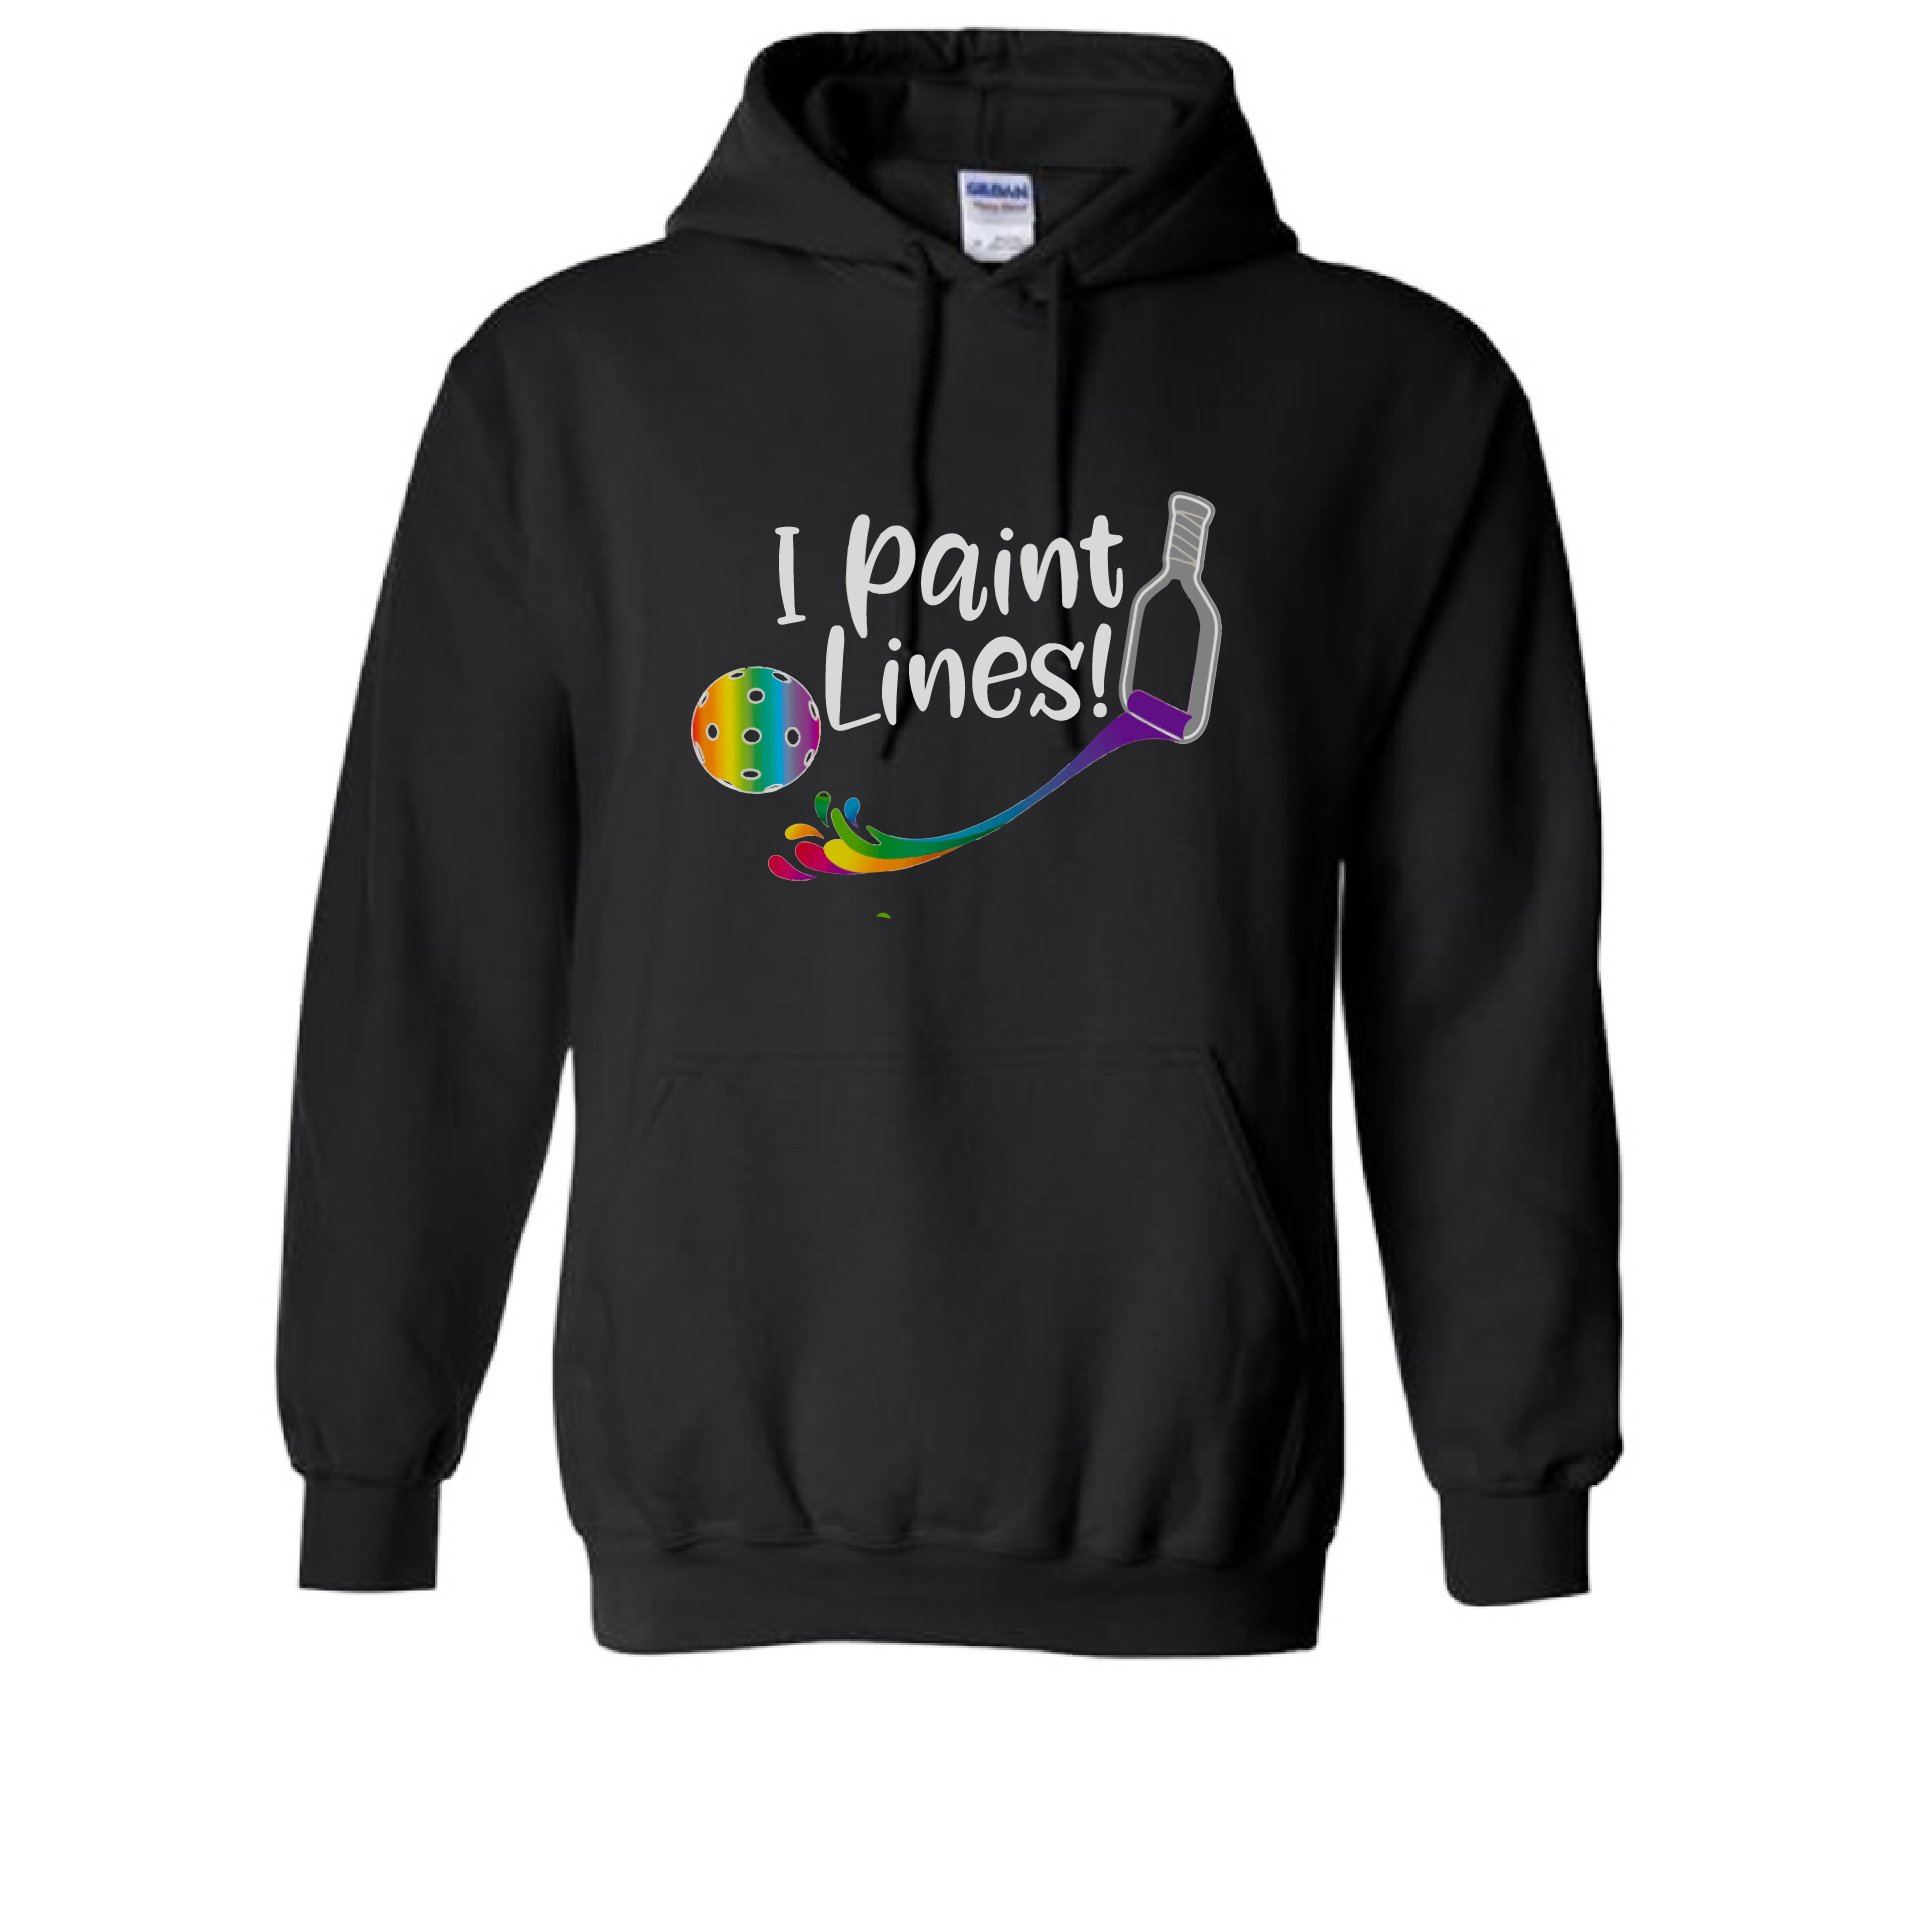 Pickleball Design: I Paint Lines  Unisex Hooded Sweatshirt: Moisture-wicking, double-lined hood, front pouch pocket.  This unisex hooded sweatshirt is ultra comfortable and soft. Stay warm on the Pickleball courts while being that hit with this one of kind design.